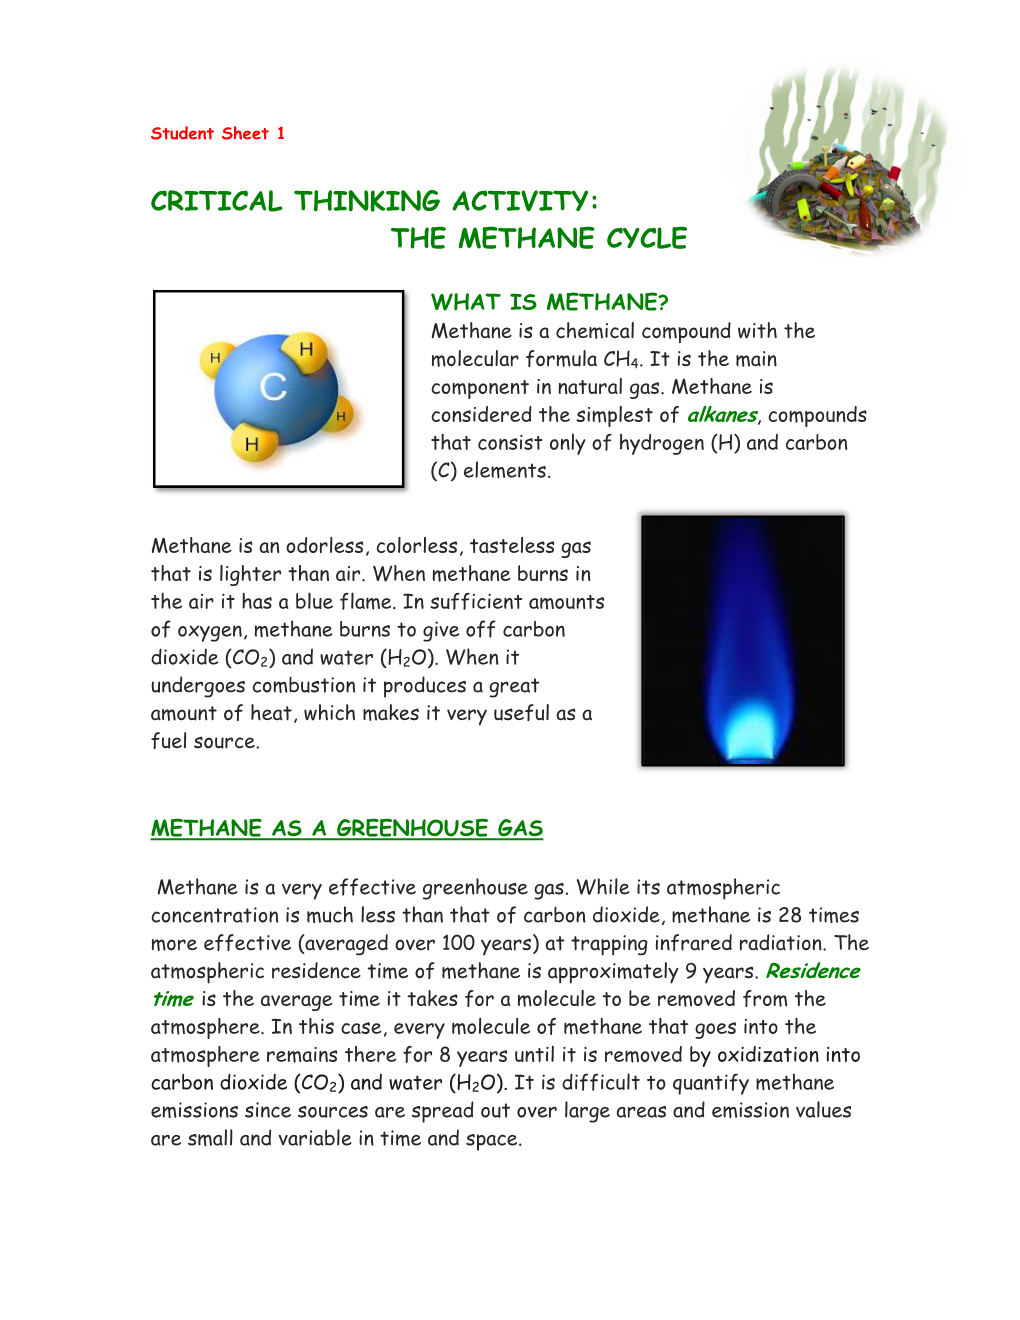 Critical Thinking Activity: the Methane Cycle